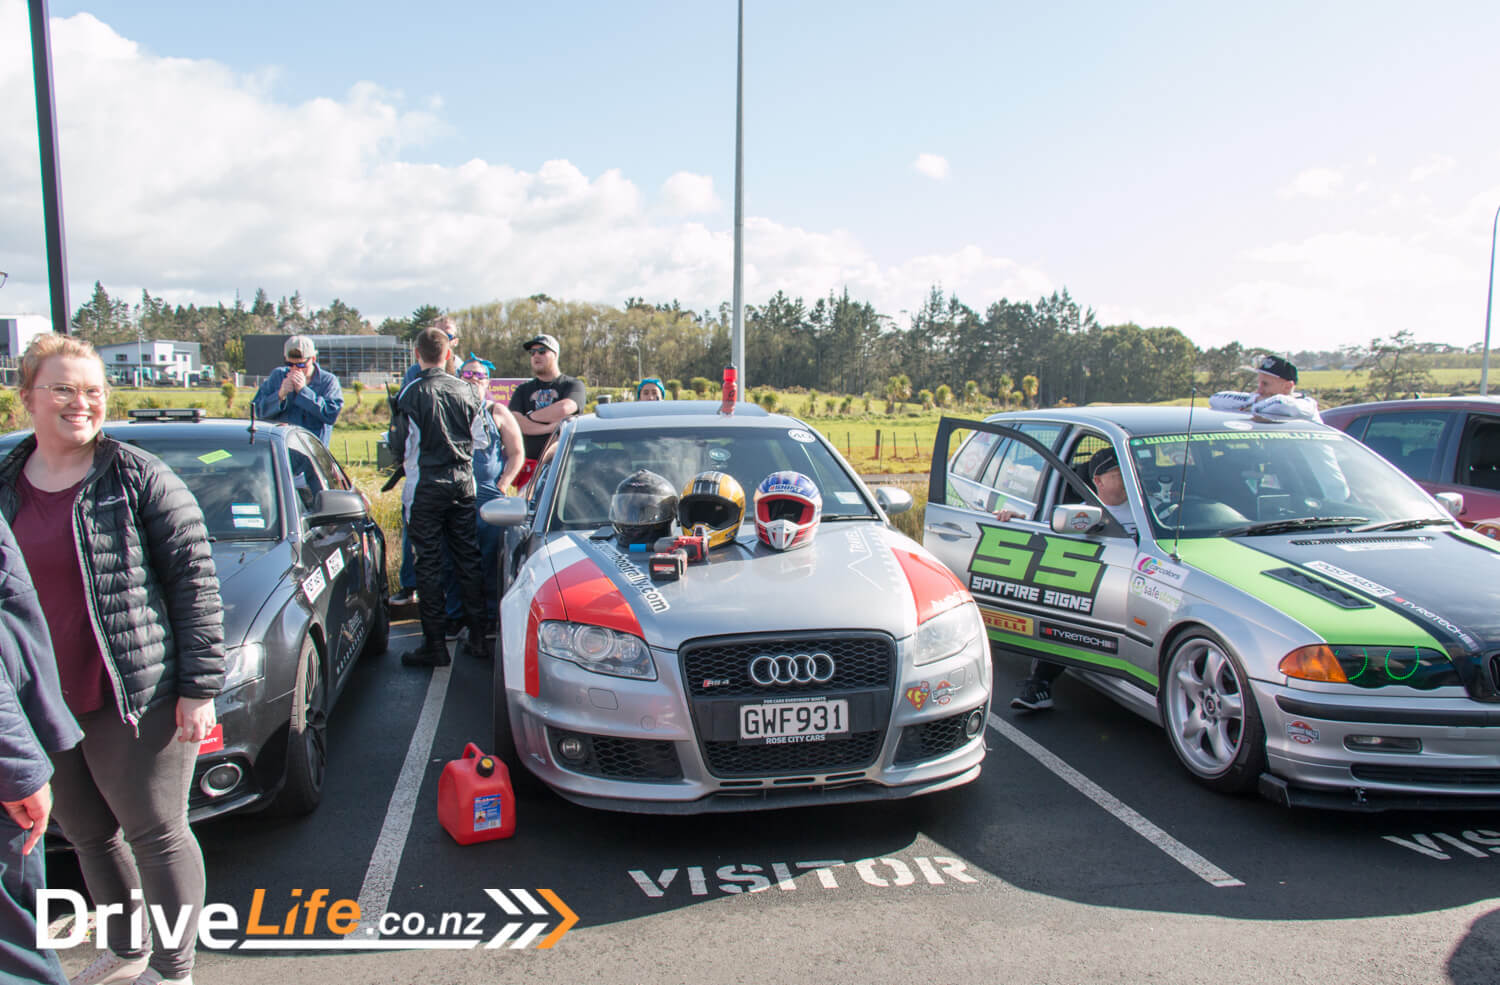 Taking a Commodore VXR on the Gumboot Rally Championship - DriveLife